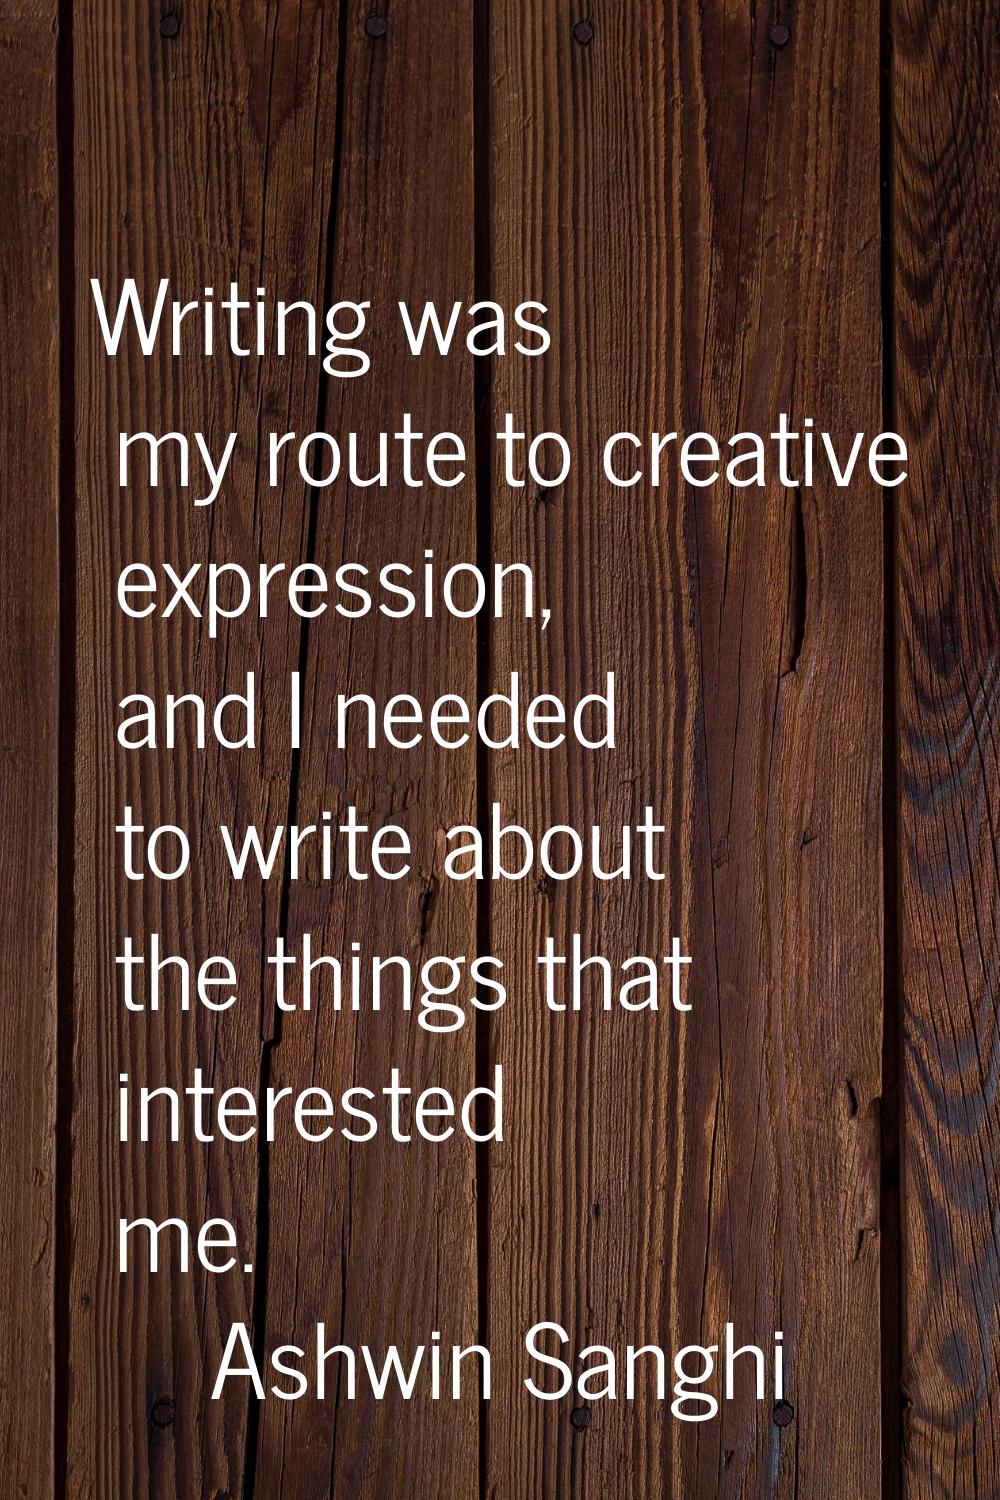 Writing was my route to creative expression, and I needed to write about the things that interested